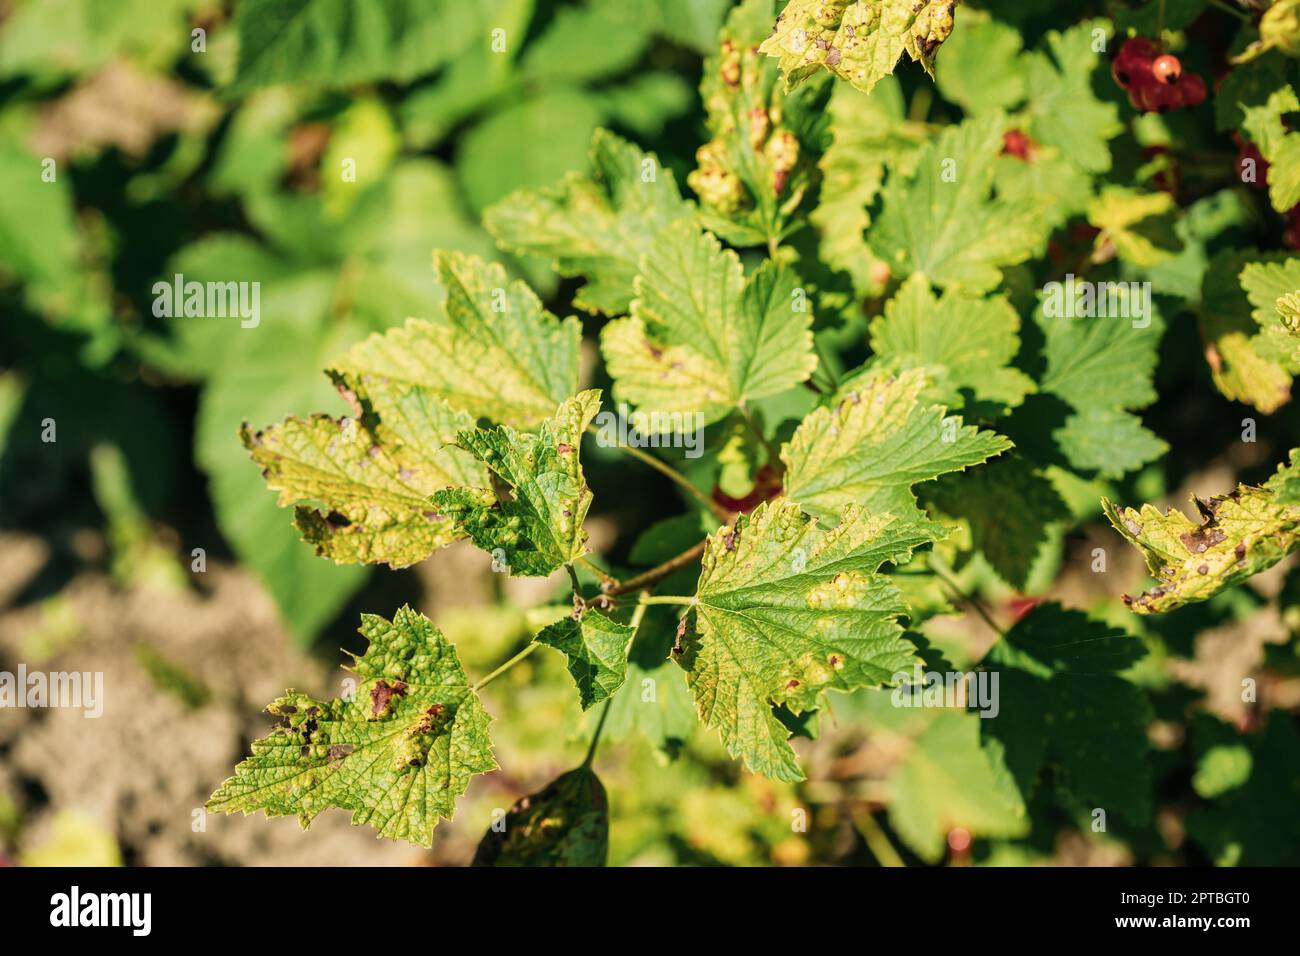 Traces Of Defeat By Leaf Gall Midges On Red Currant Leaves In Summer Sunny Day. Plant Disease. Stock Photo